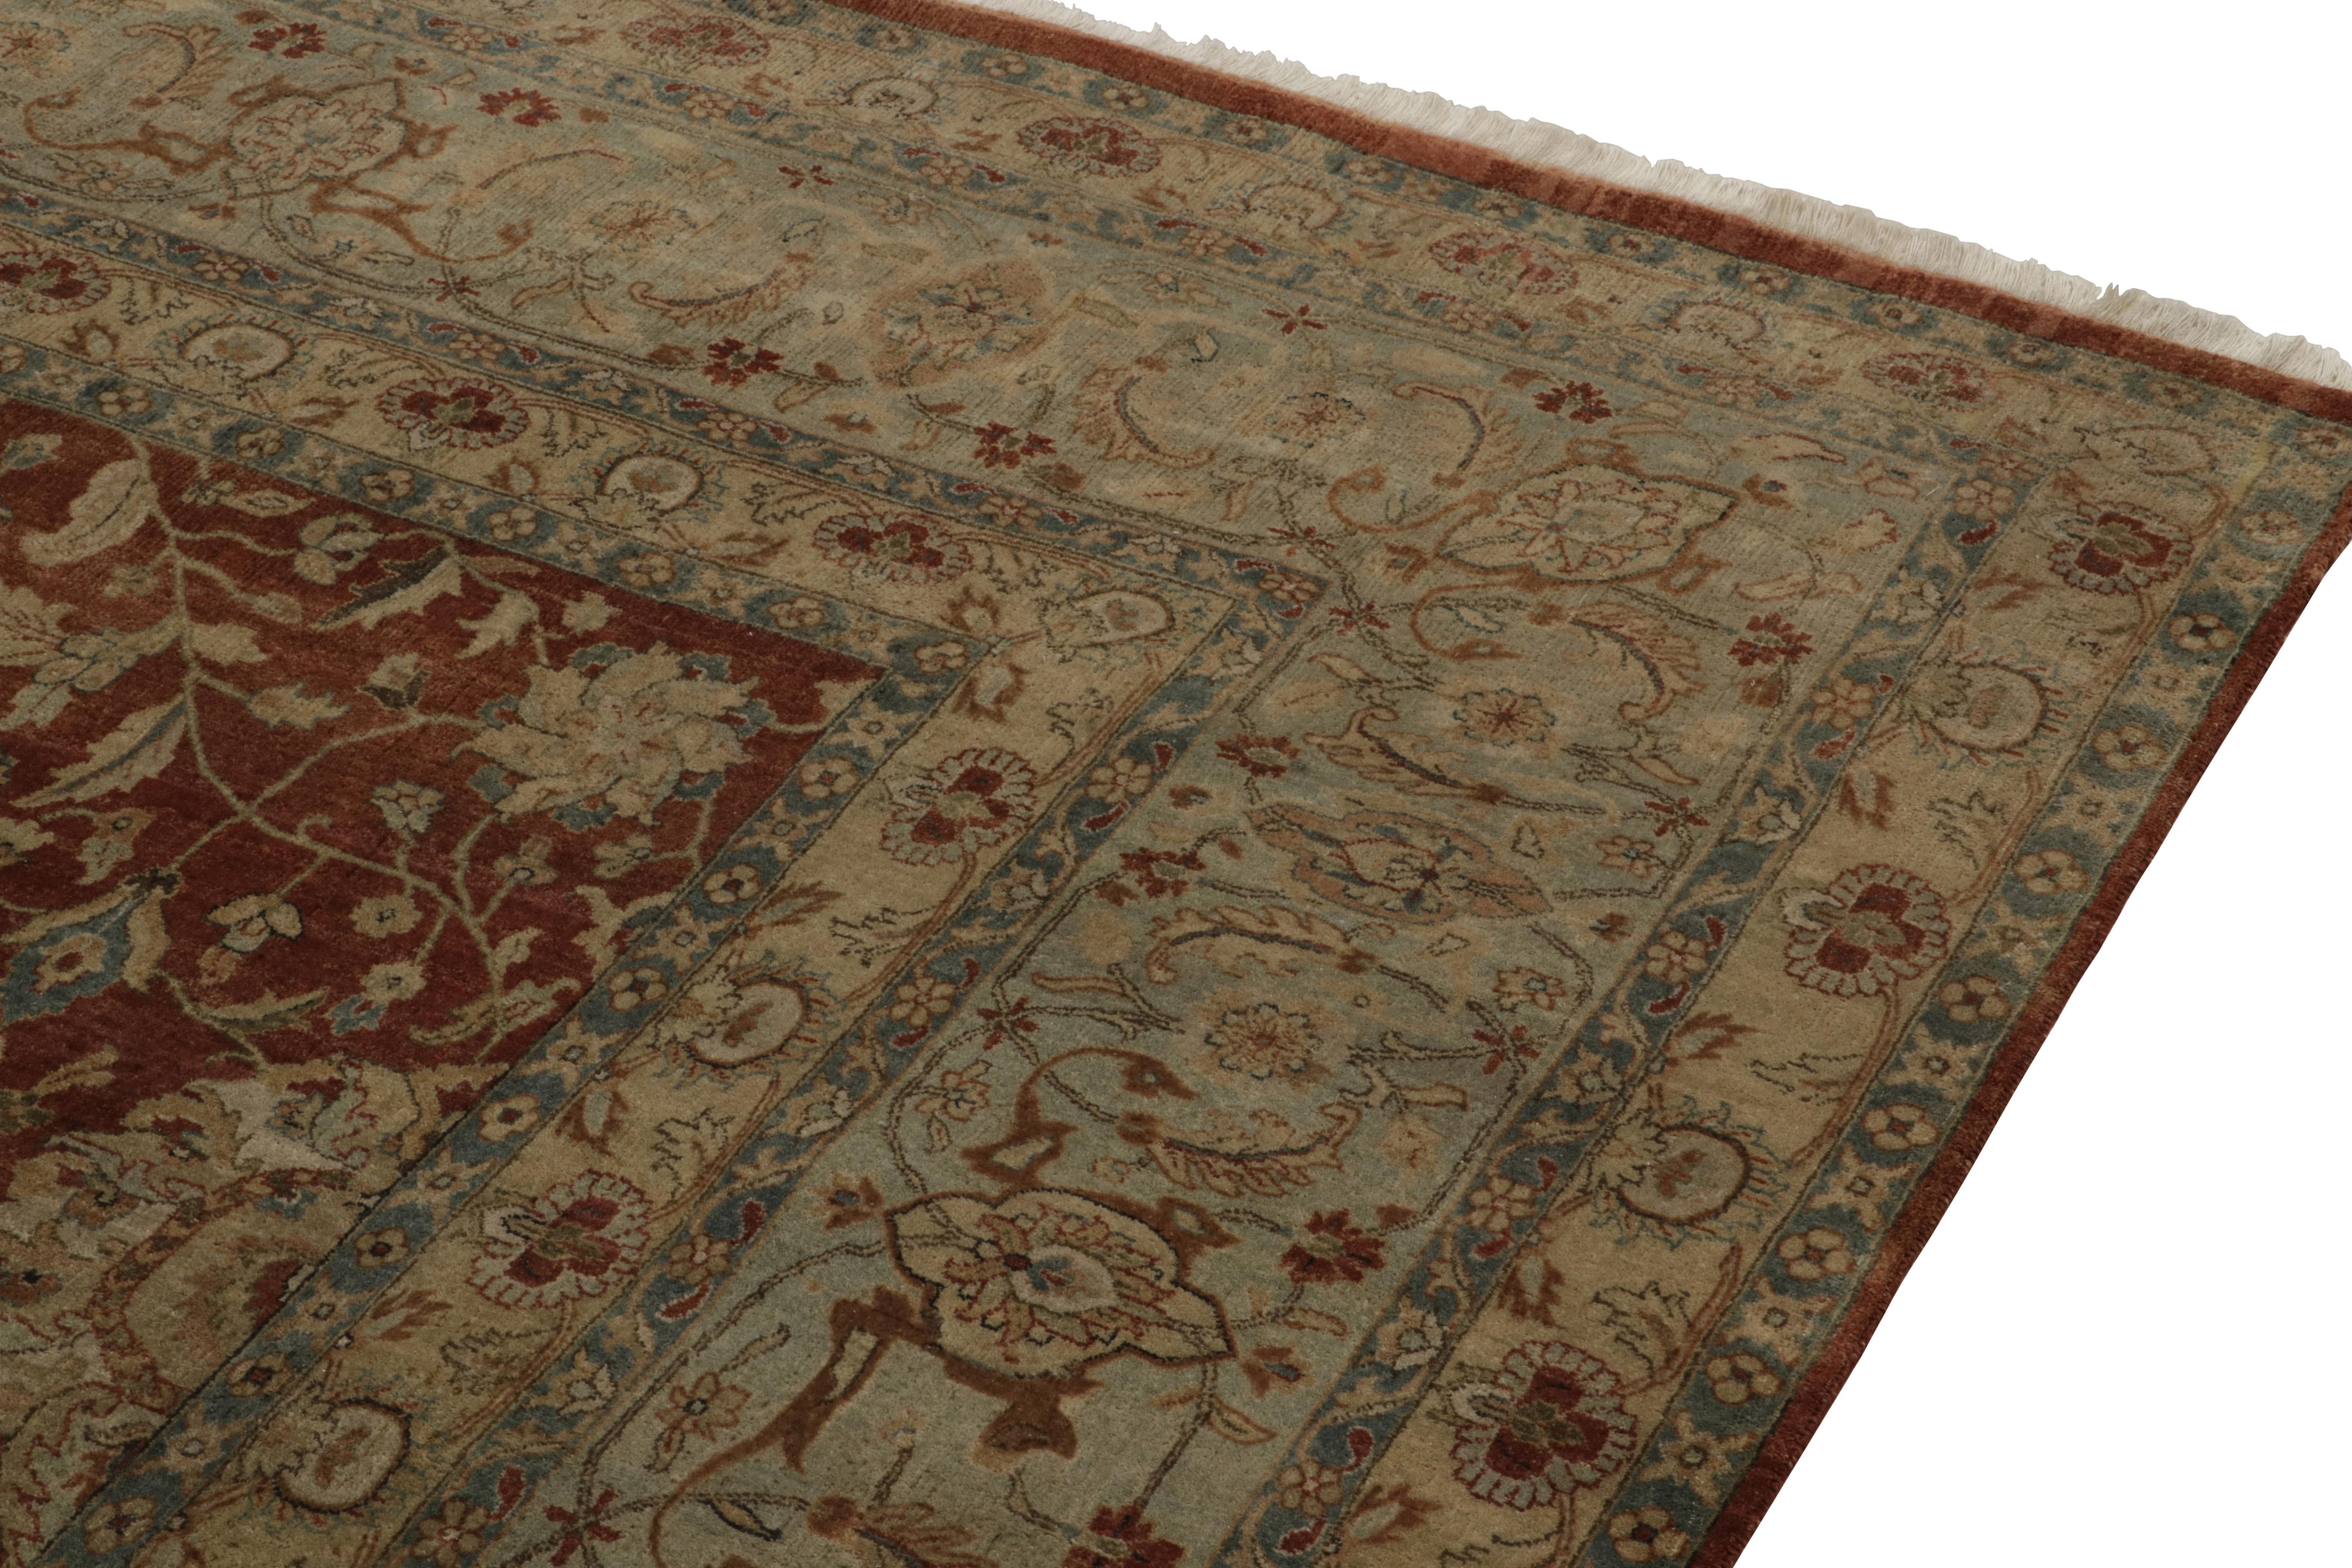 Indian Rug & Kilim’s Classic Tabriz style rug with Beige & Blue Florals on Rust Red For Sale